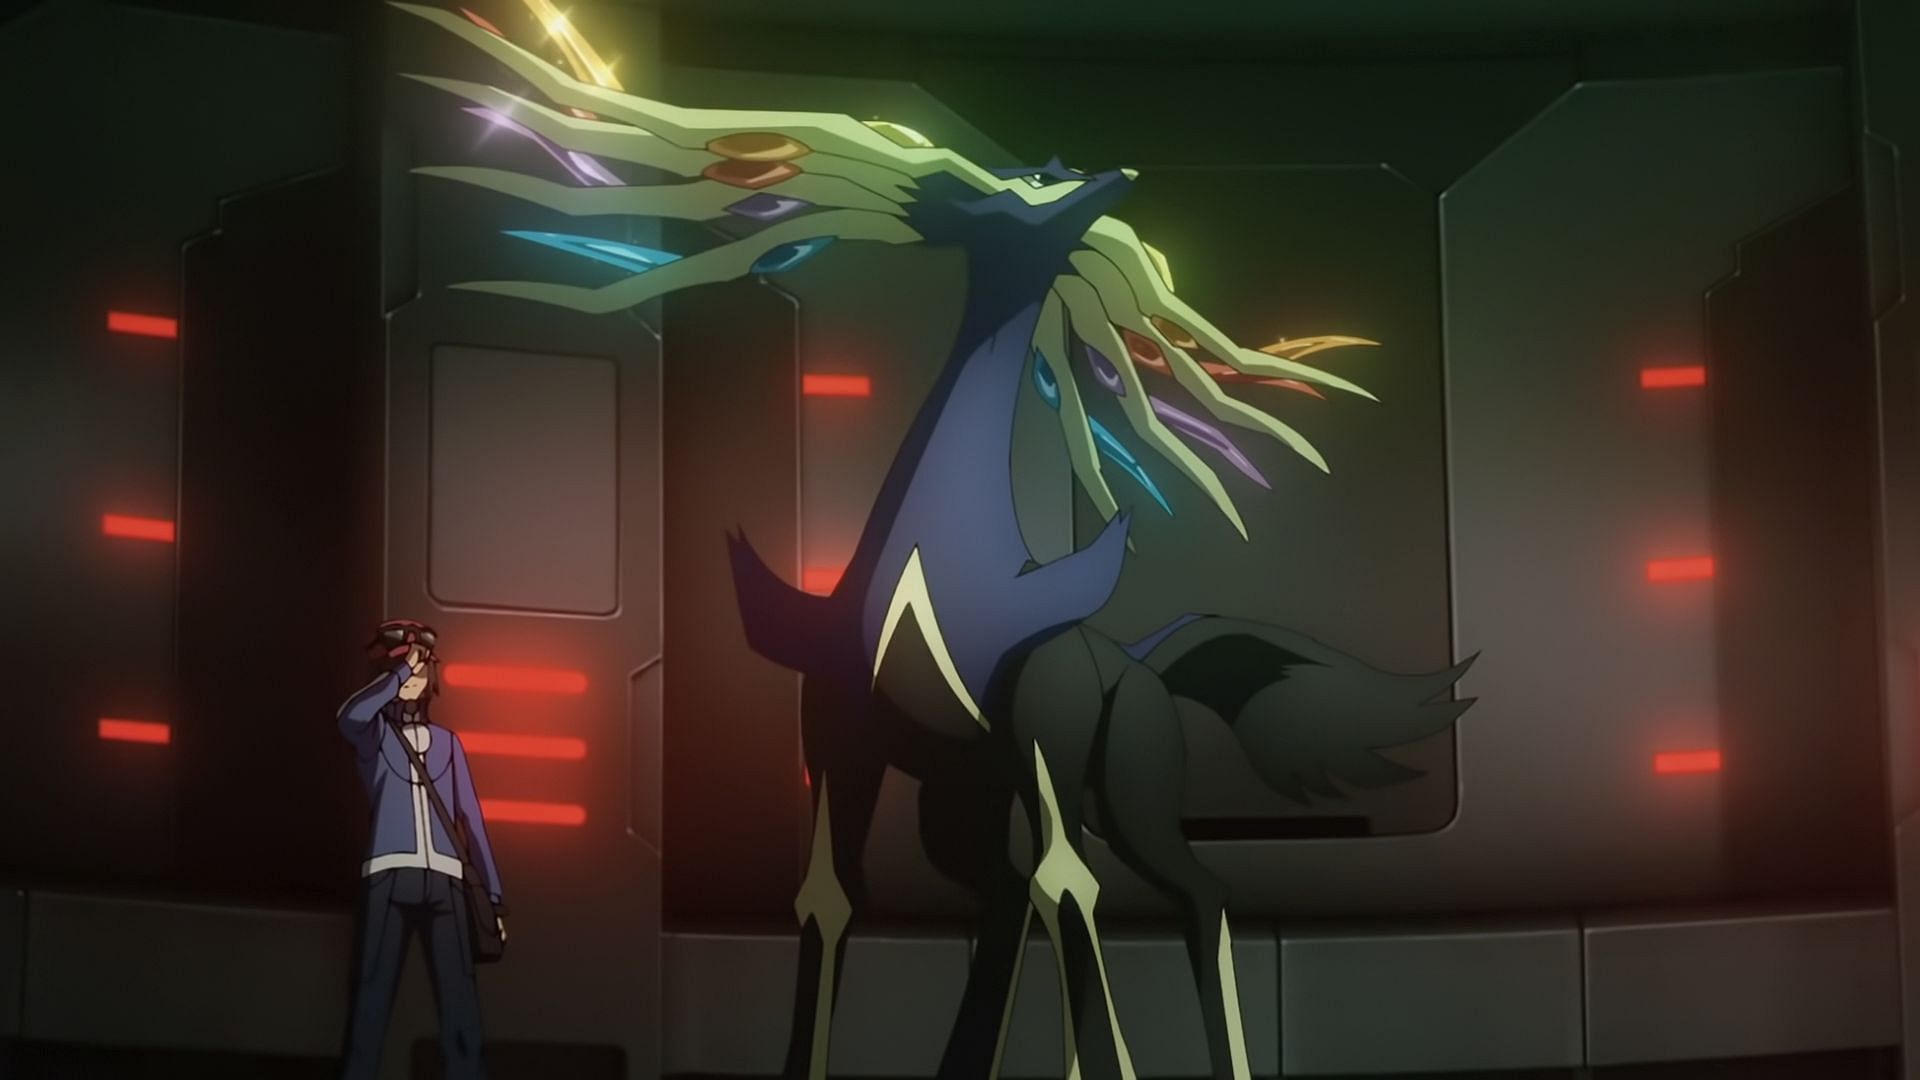 Calem uses Xerneas against Lysandre in the Evolutions anime (Image via The Pokemon Company)